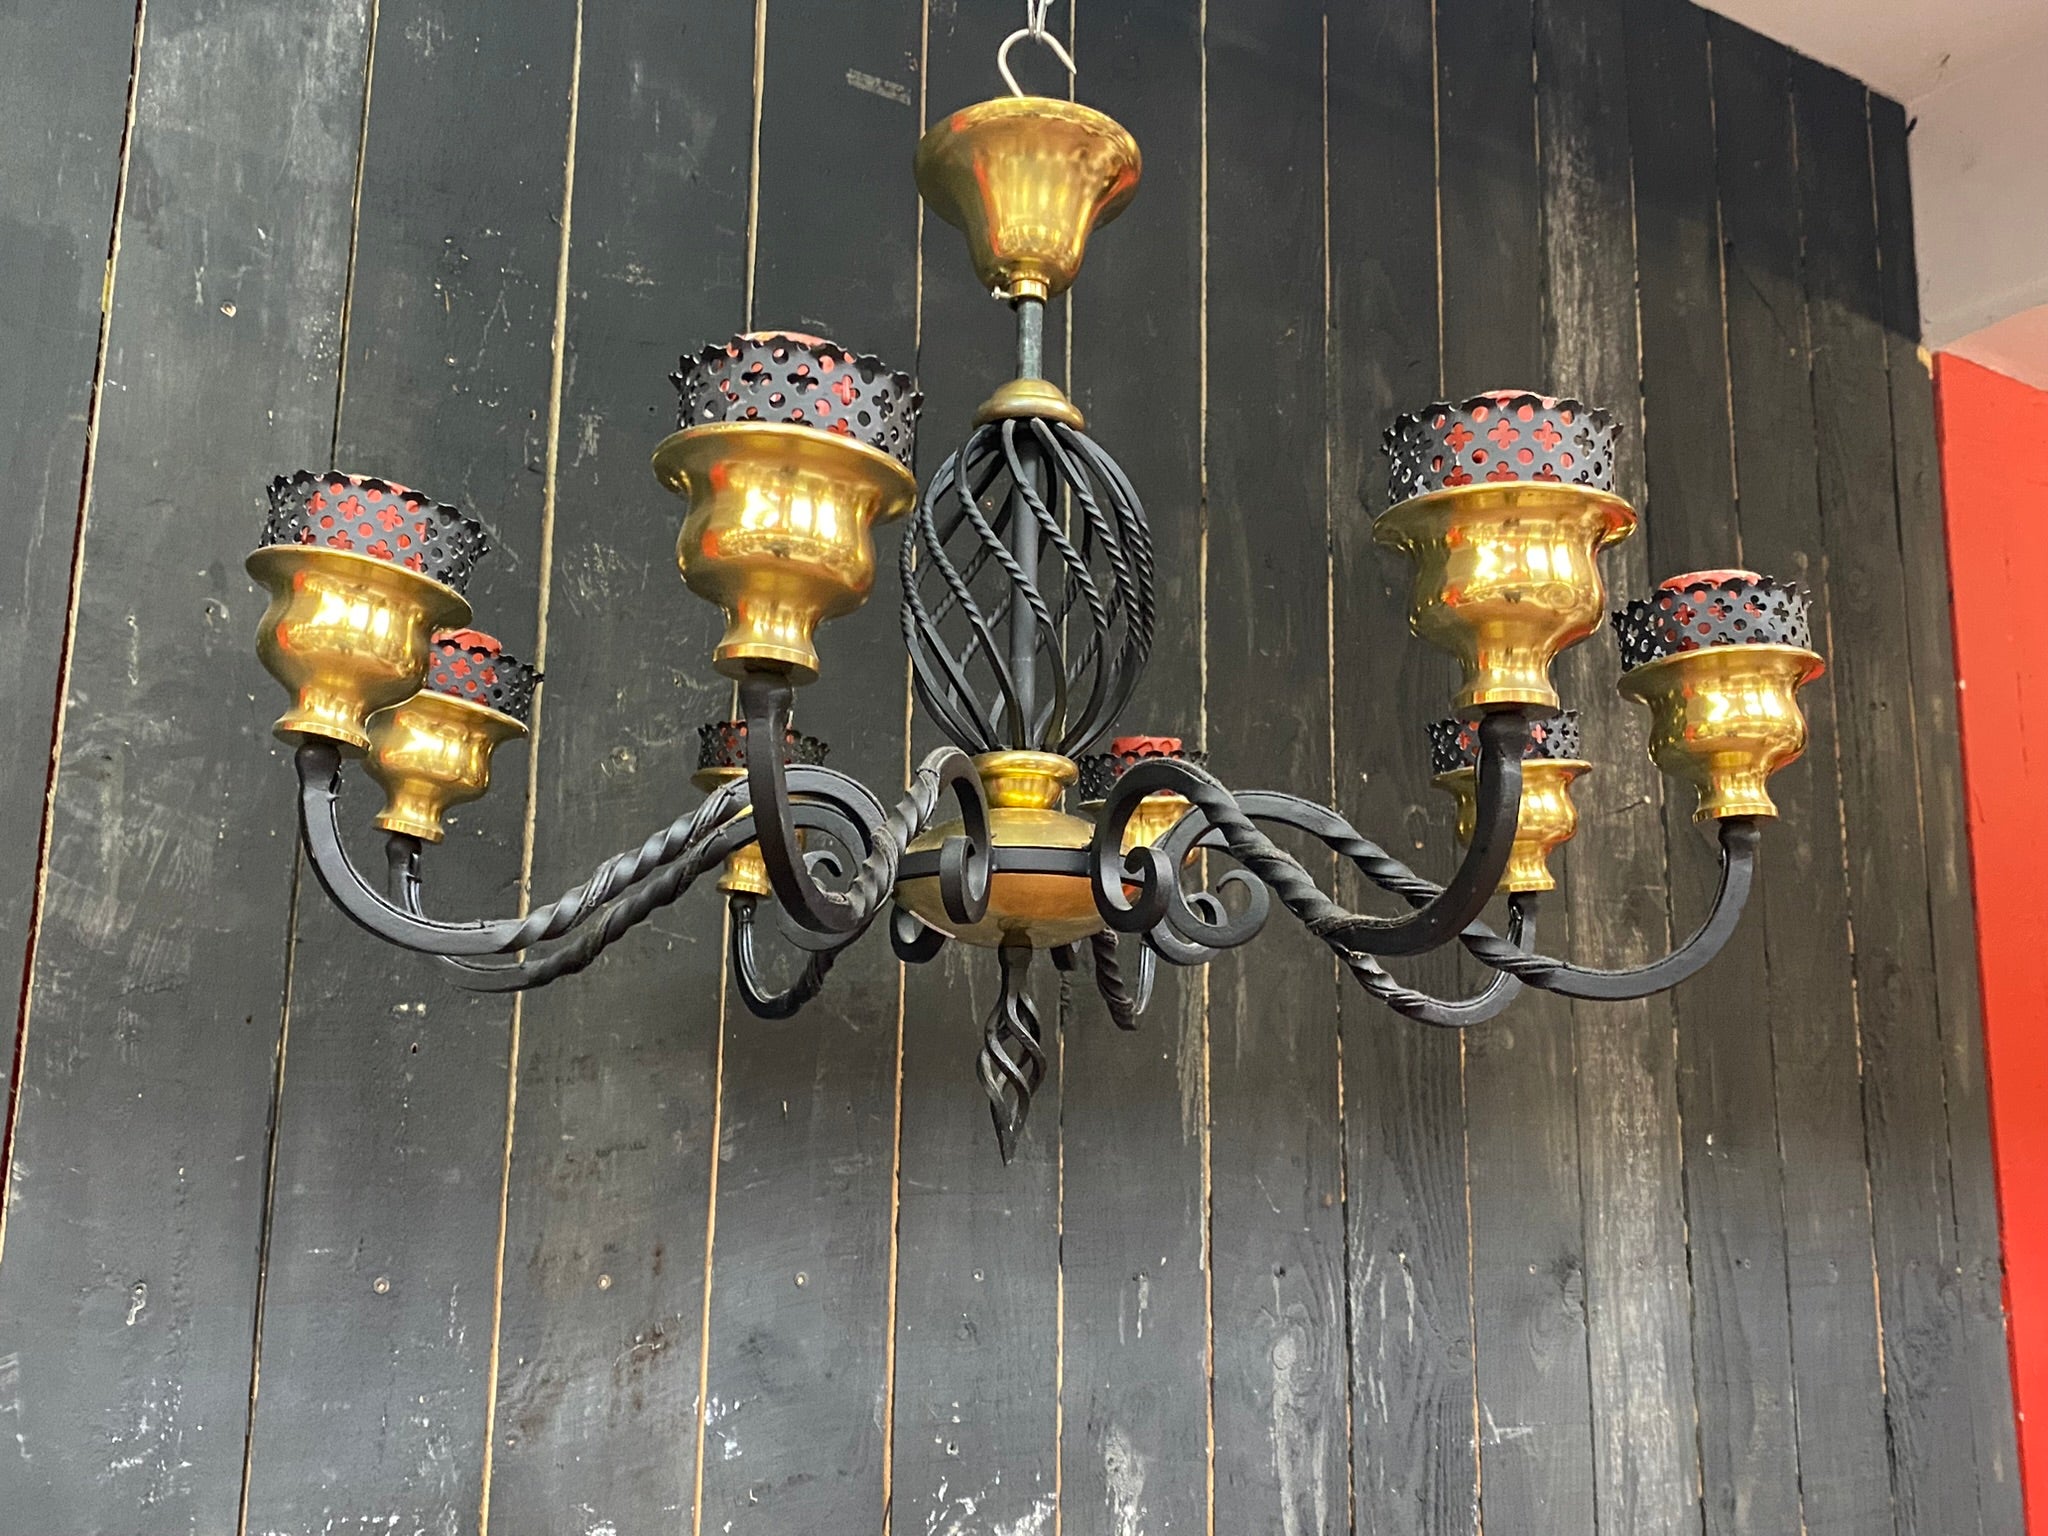 Chandelier in lacquered metal and brass, circa 1950.
The price is for one.
Two are available.